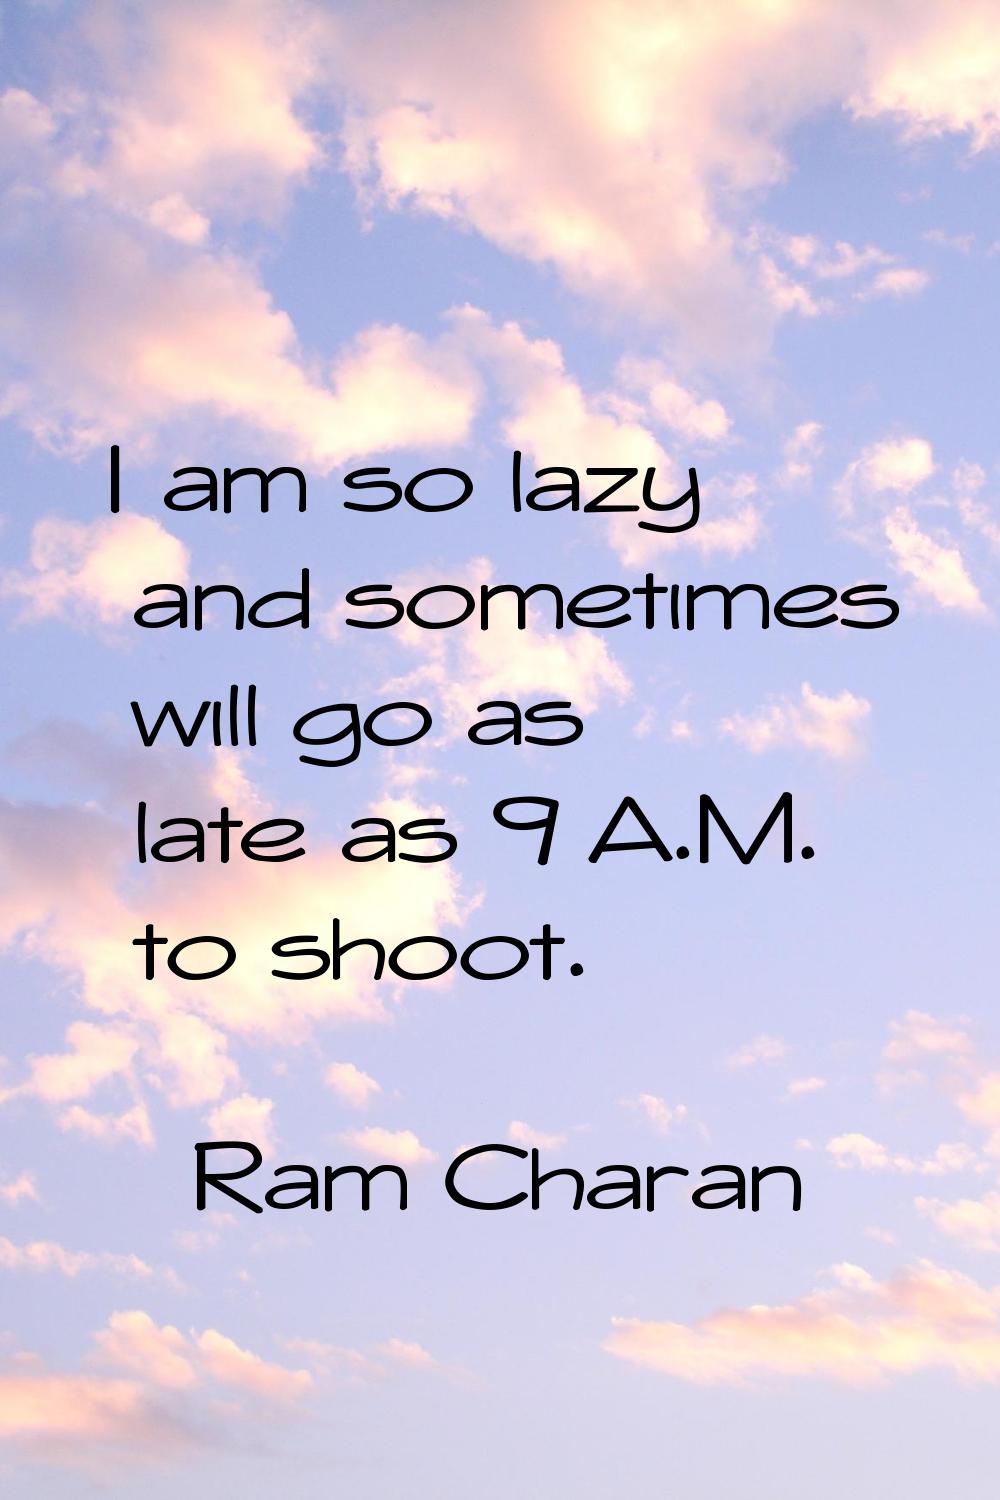 I am so lazy and sometimes will go as late as 9 A.M. to shoot.